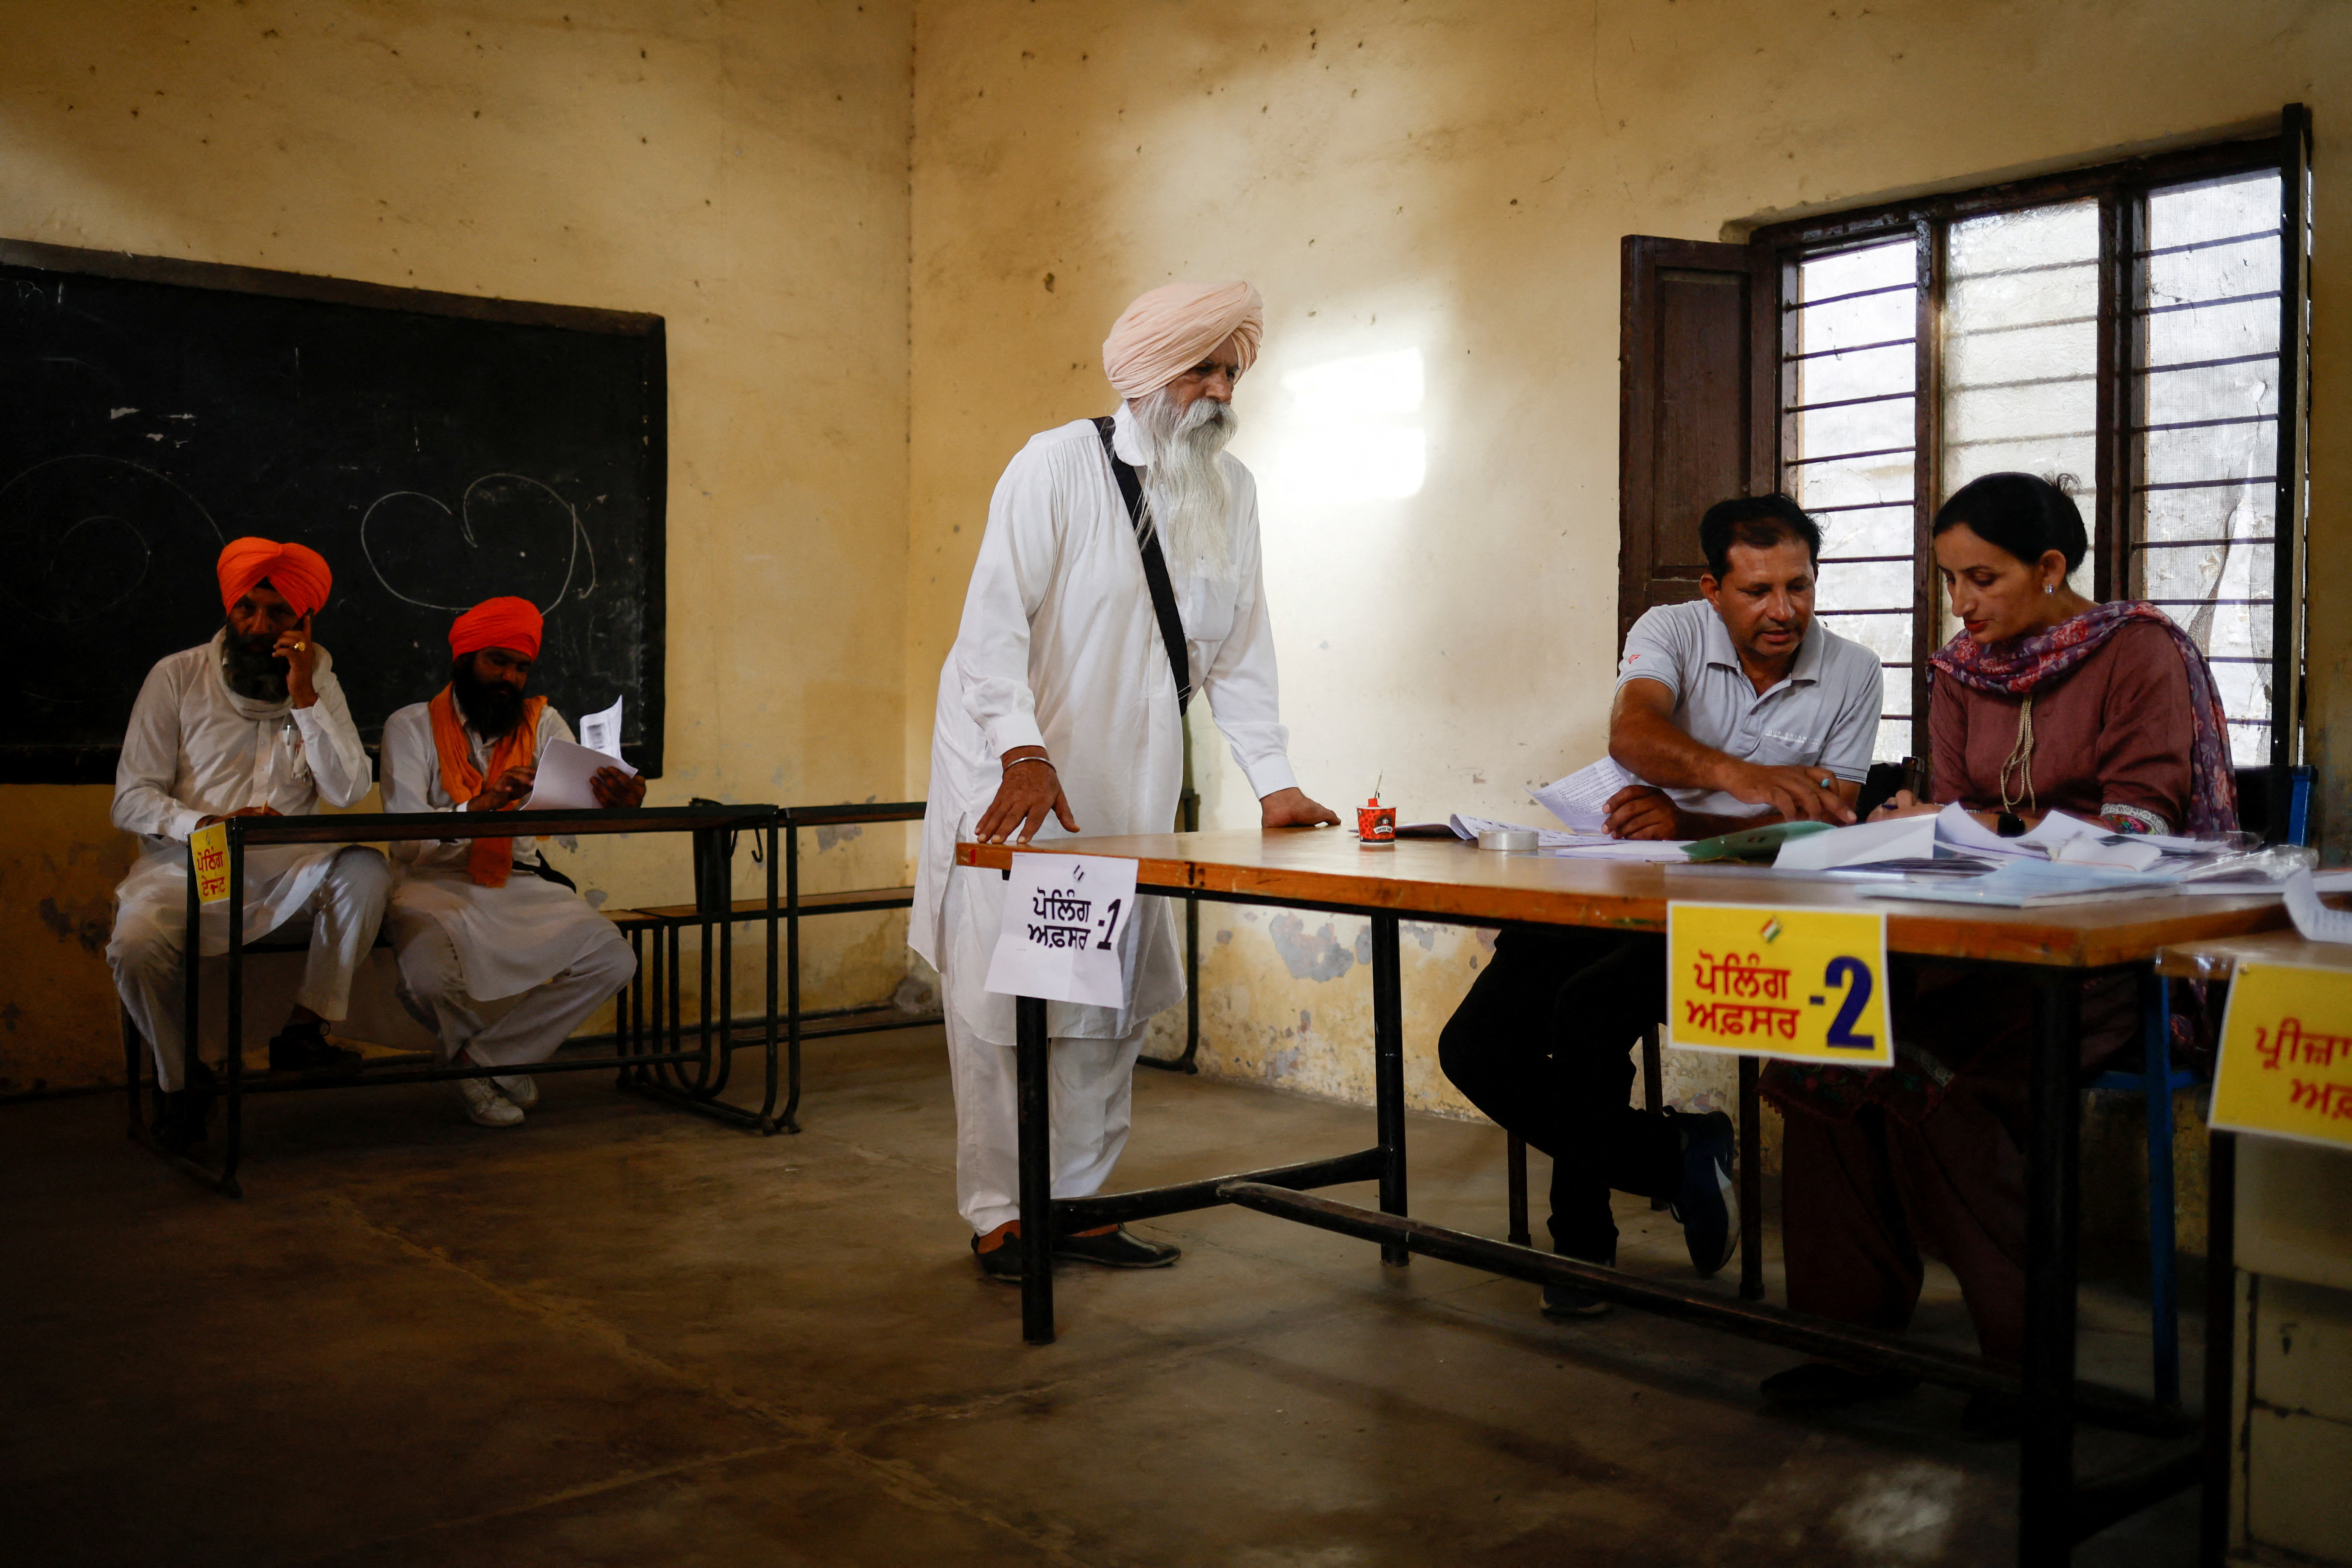 Seventh phase of the general elections, in Firozpur district